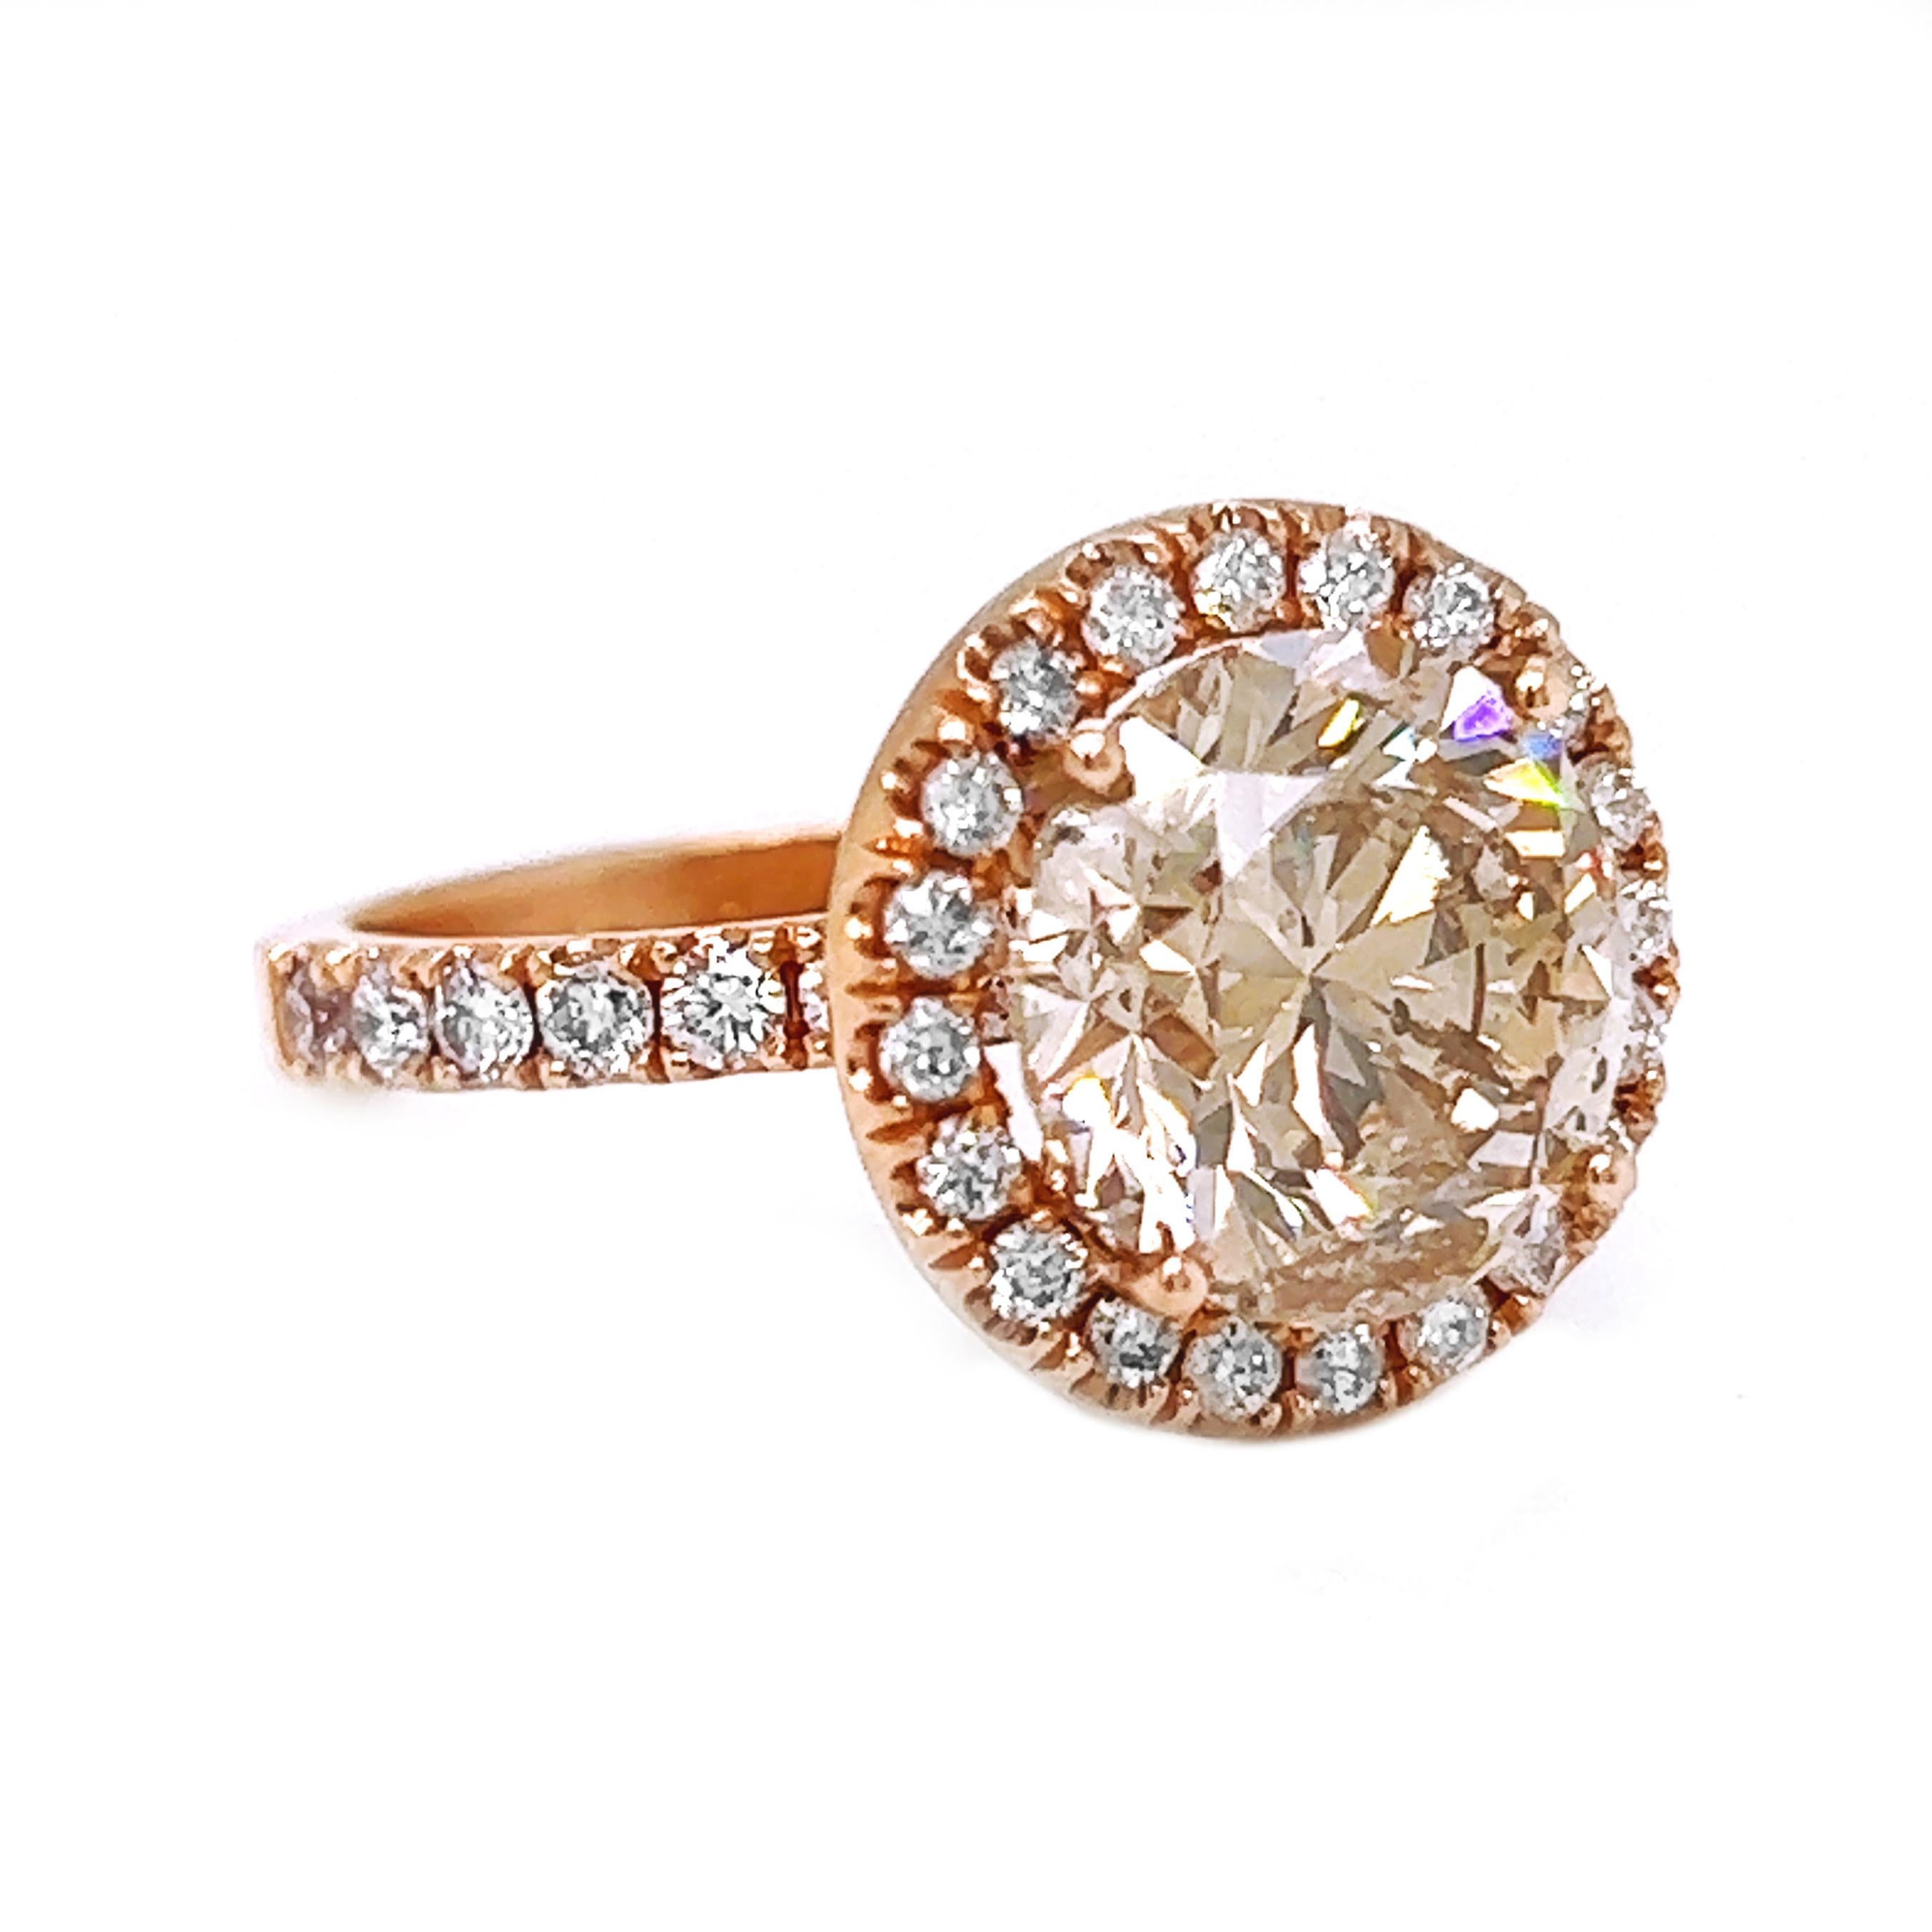 What makes this piece truly unique and special is the remarkable combination of elements that come together to create an extraordinary piece of jewelry:

1. 5 Carat Natural Mined Cognac Light Brown Diamond: The centerpiece of this ring is a sizable